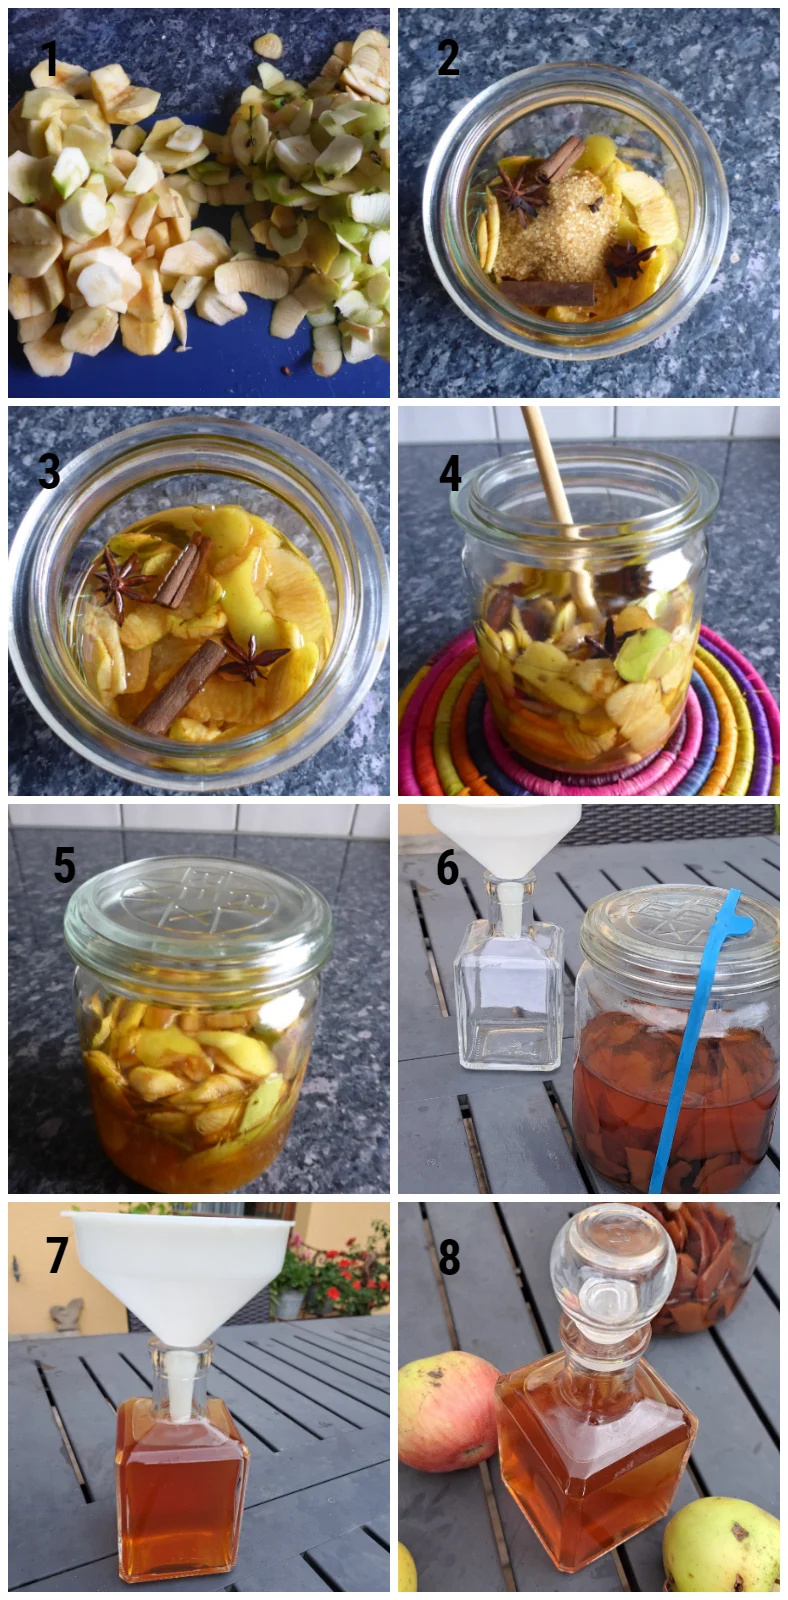 A photo illustrating the process of making apple liqueur using fresh apple peels in a glass container. The apple peels are immersed in a mixture of vodka, spices, and brown sugar.